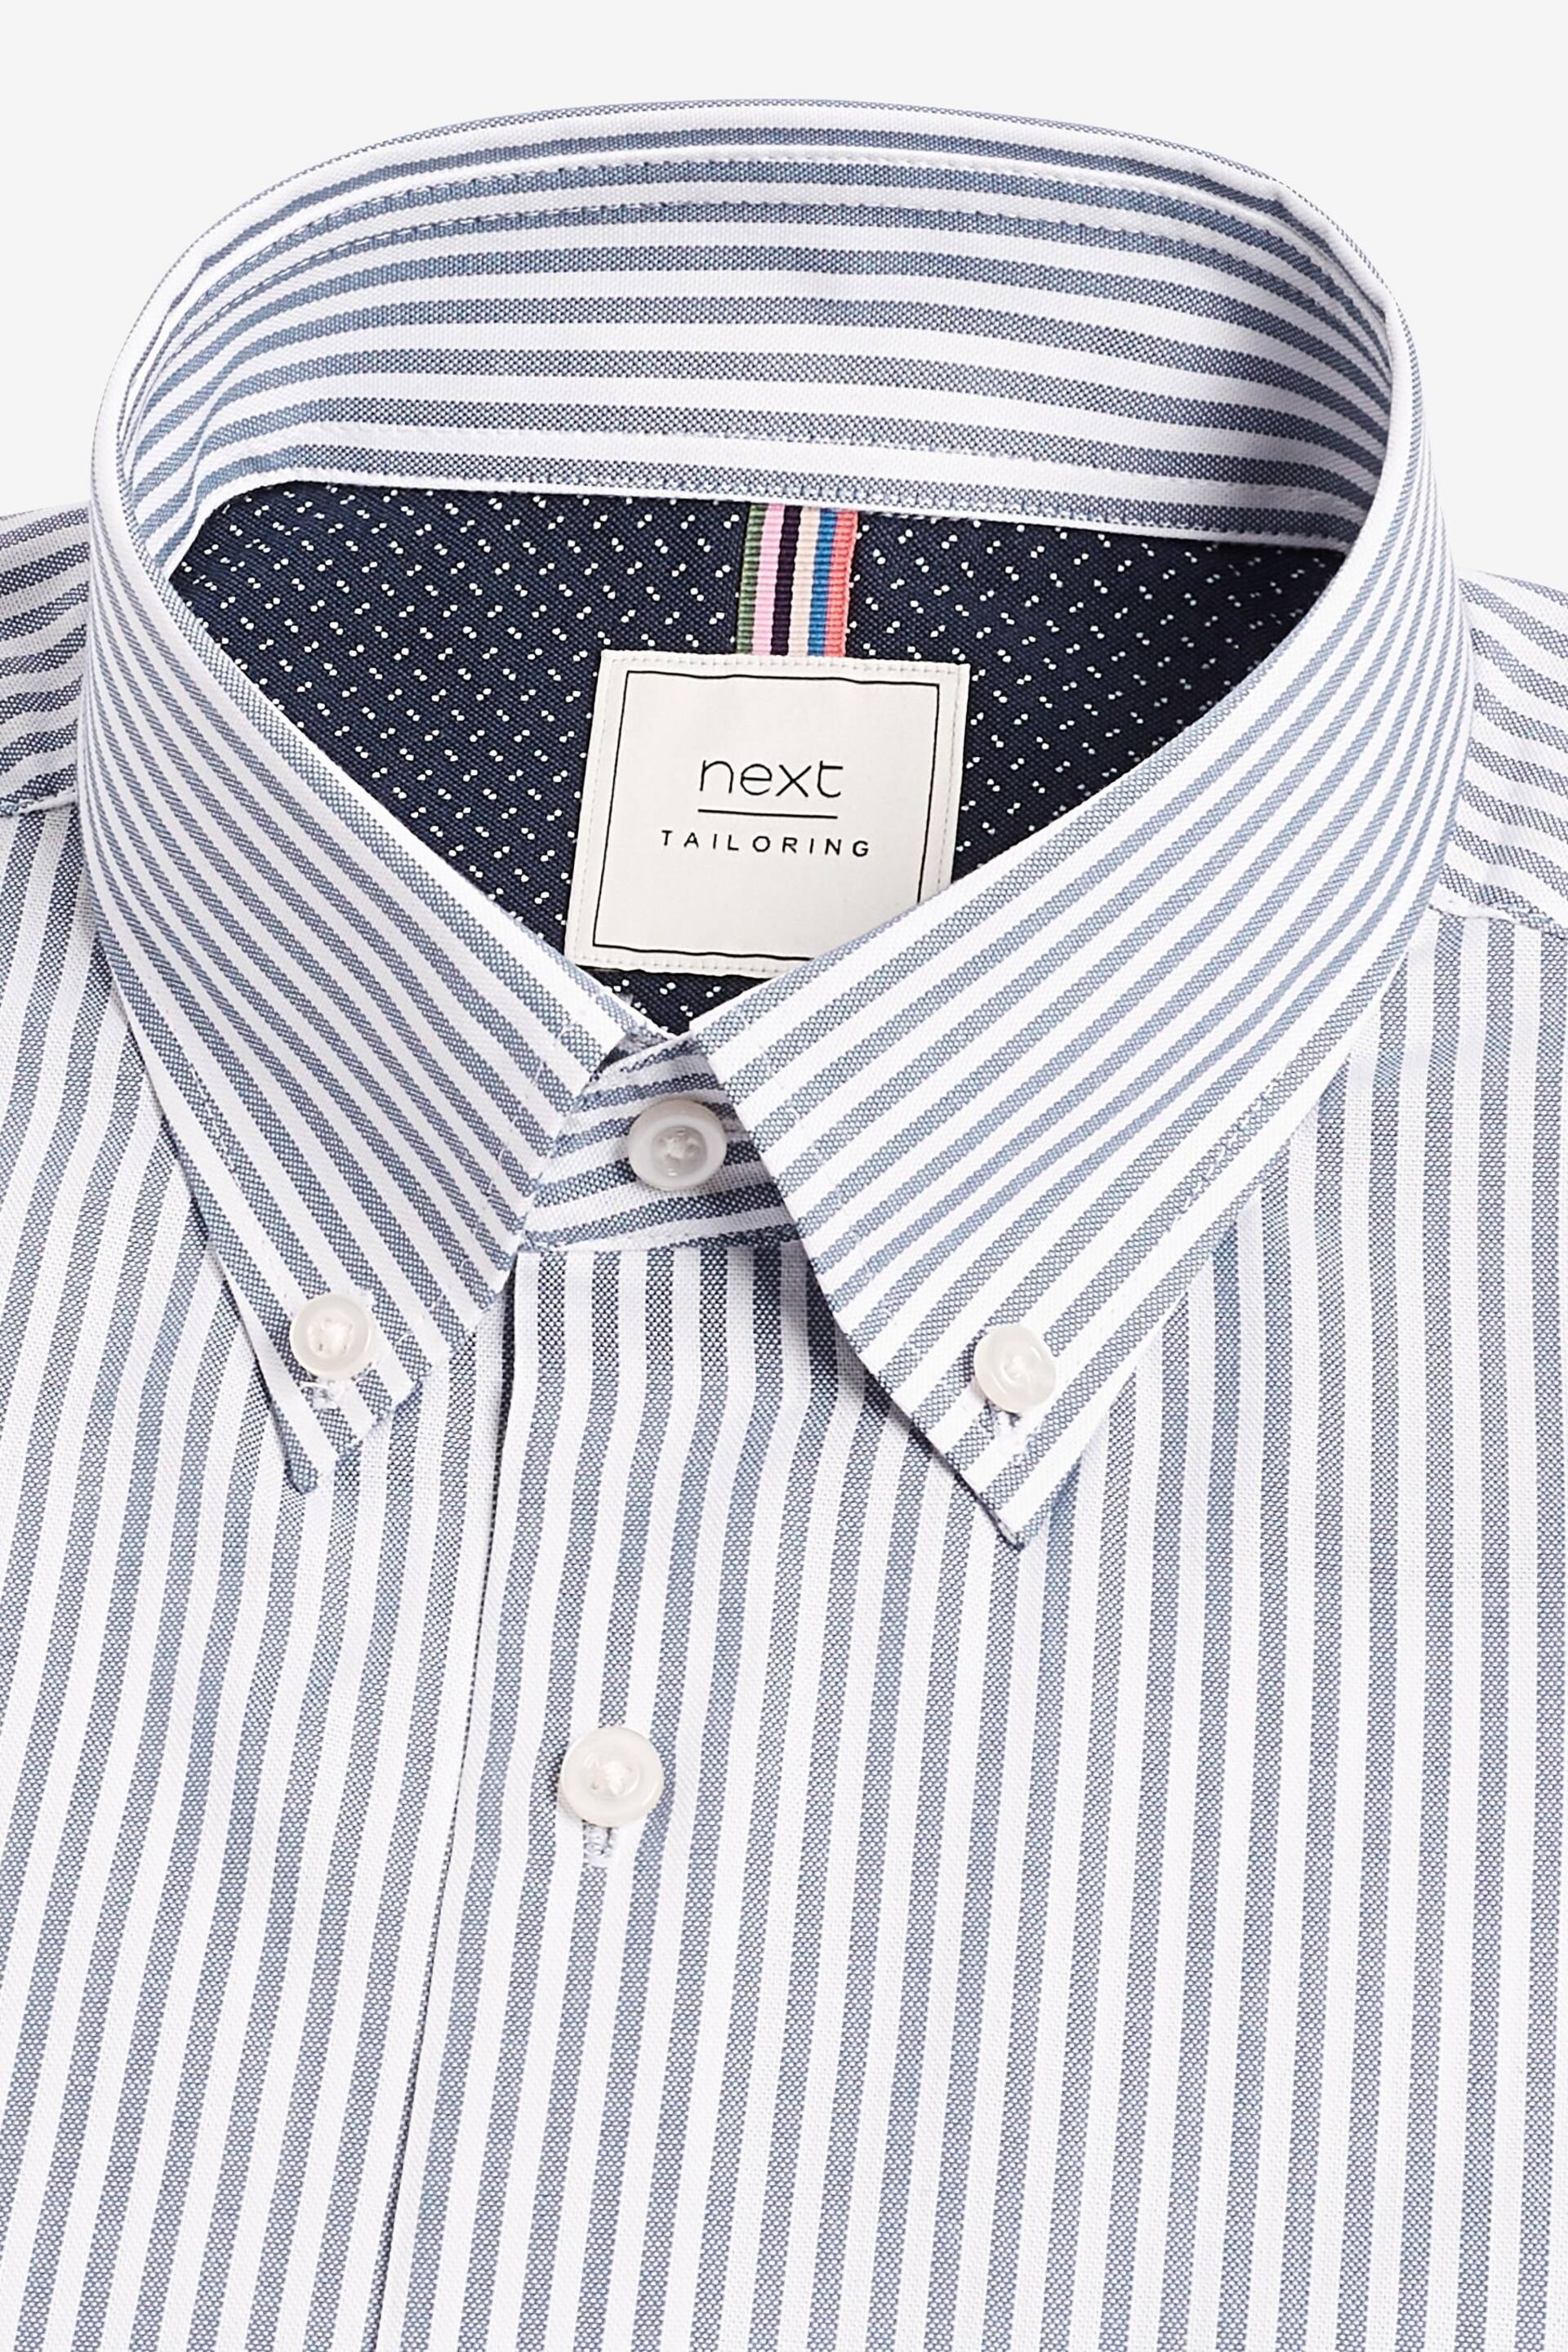 White/Blue Stripe Regular Fit Easy Iron Button Down Oxford Shirt - Image 2 of 9